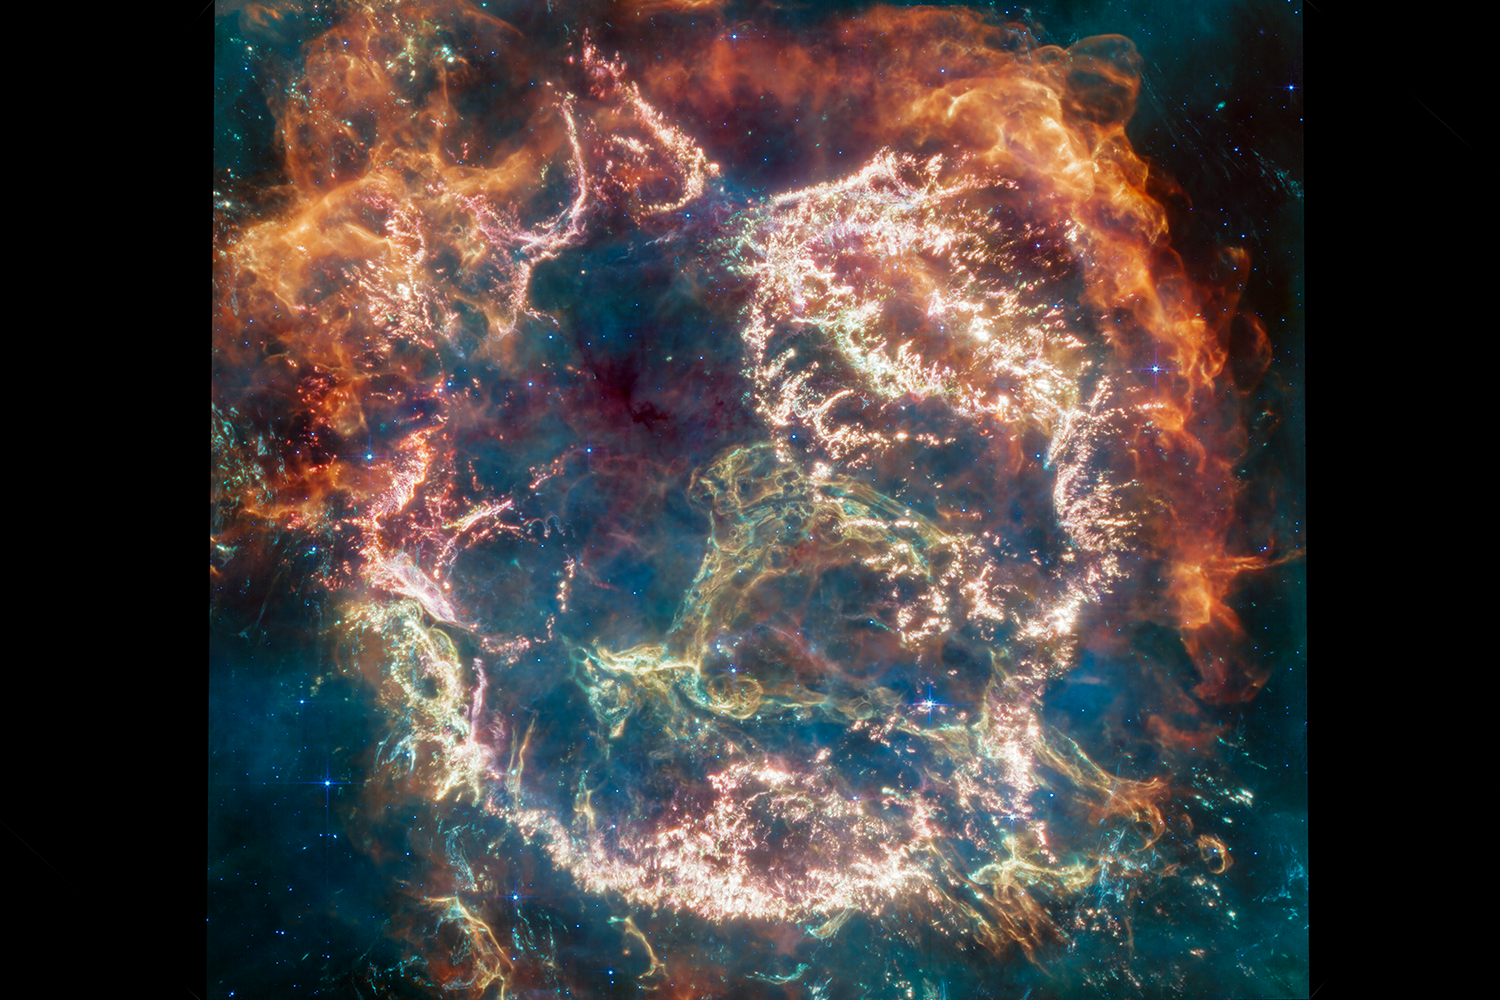 James Webb’s First Stunning Image of Cassiopeia A, Fragments of a Hellish Explosion